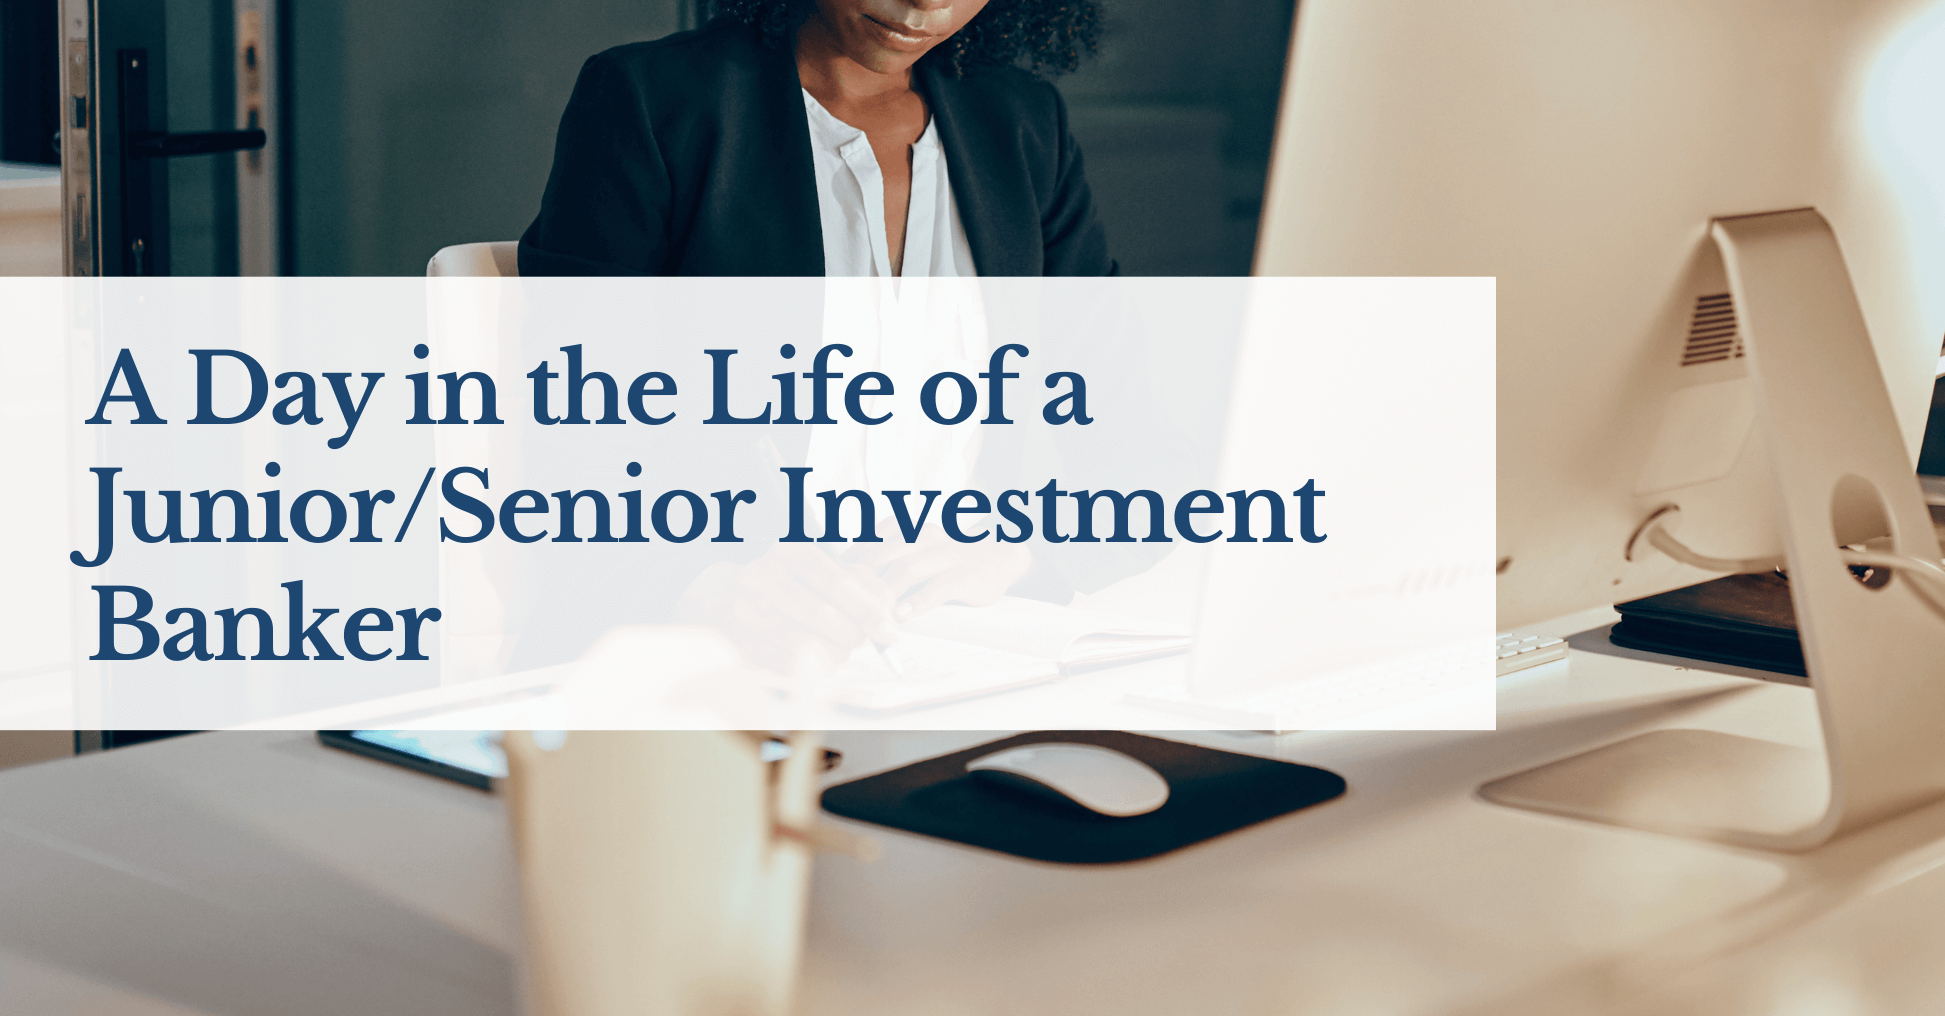 A Day in the Life of a Junior/Senior Investment Banker